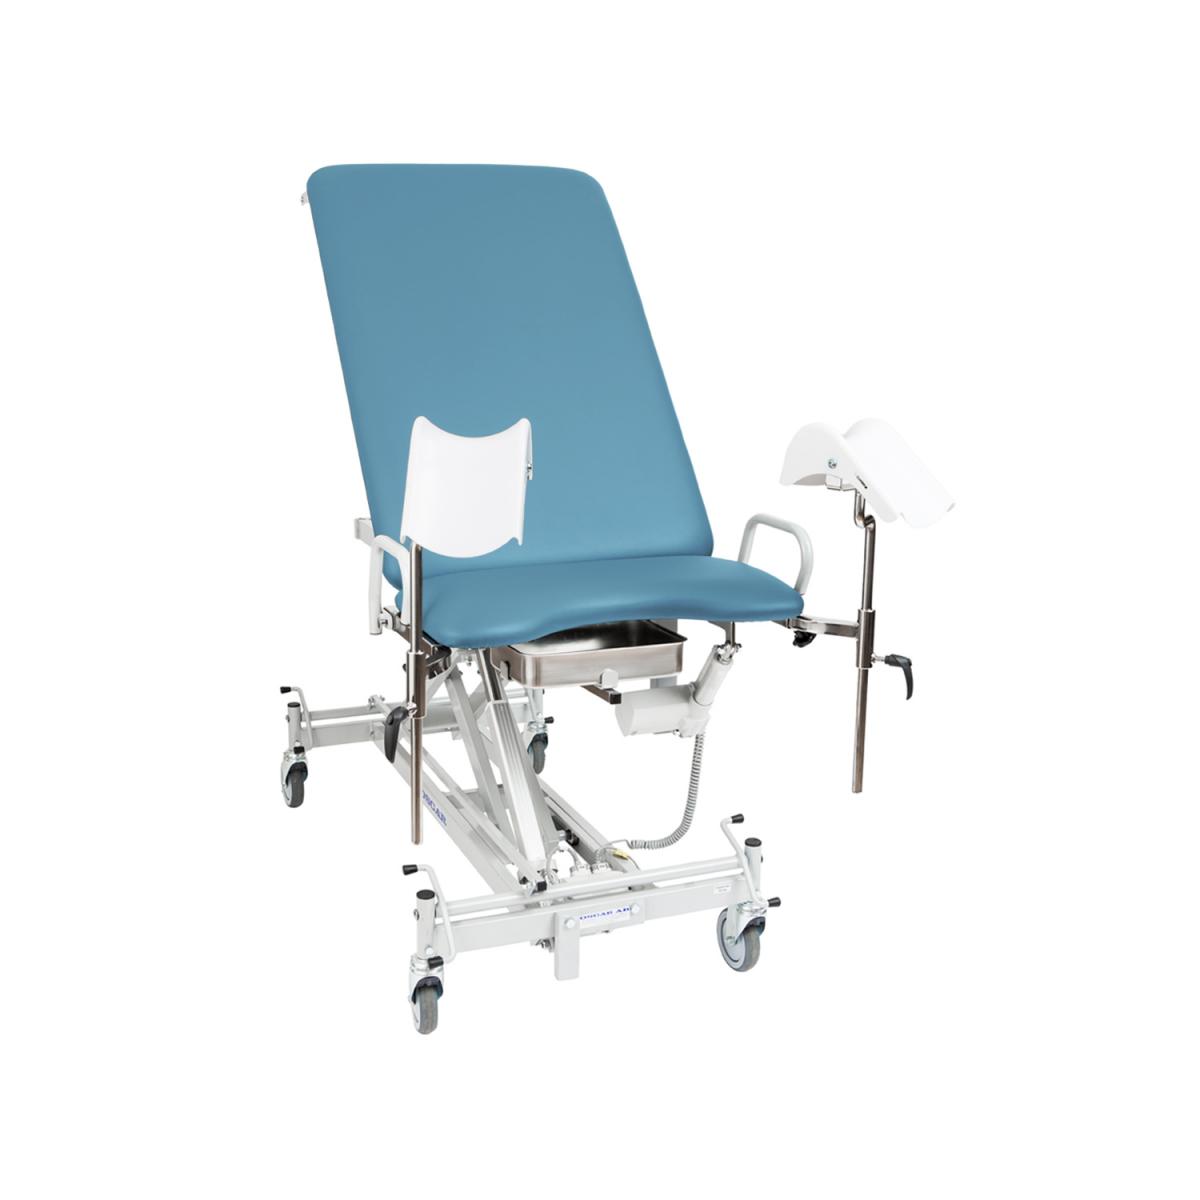 Gynaecological examination chair 036